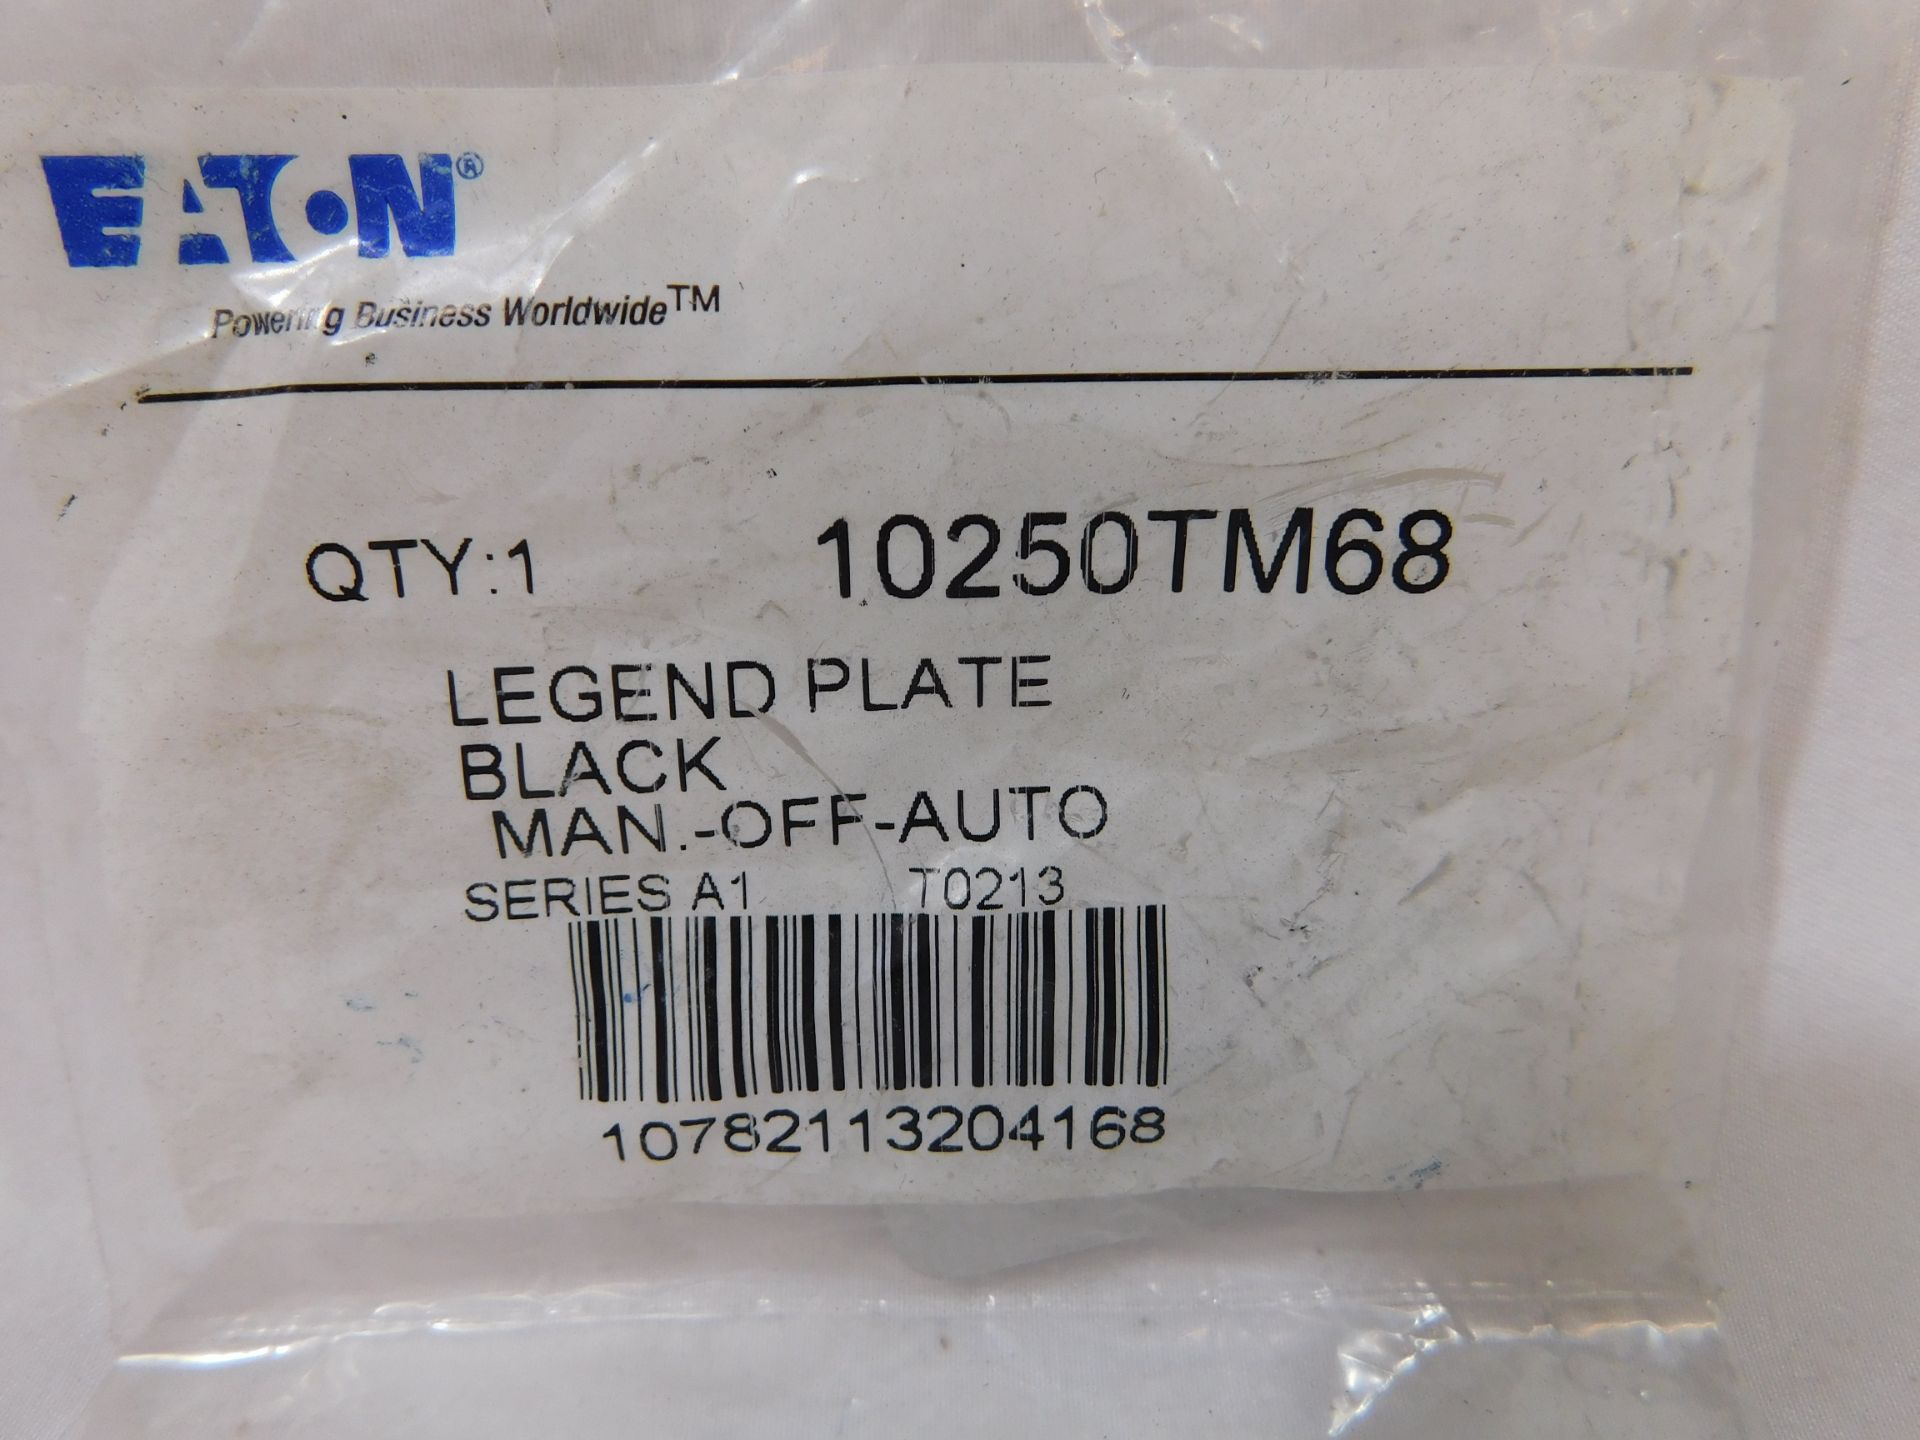 25x Eaton 10250TM68 Contact Blocks and Other Accessories Legend Plate Black EA